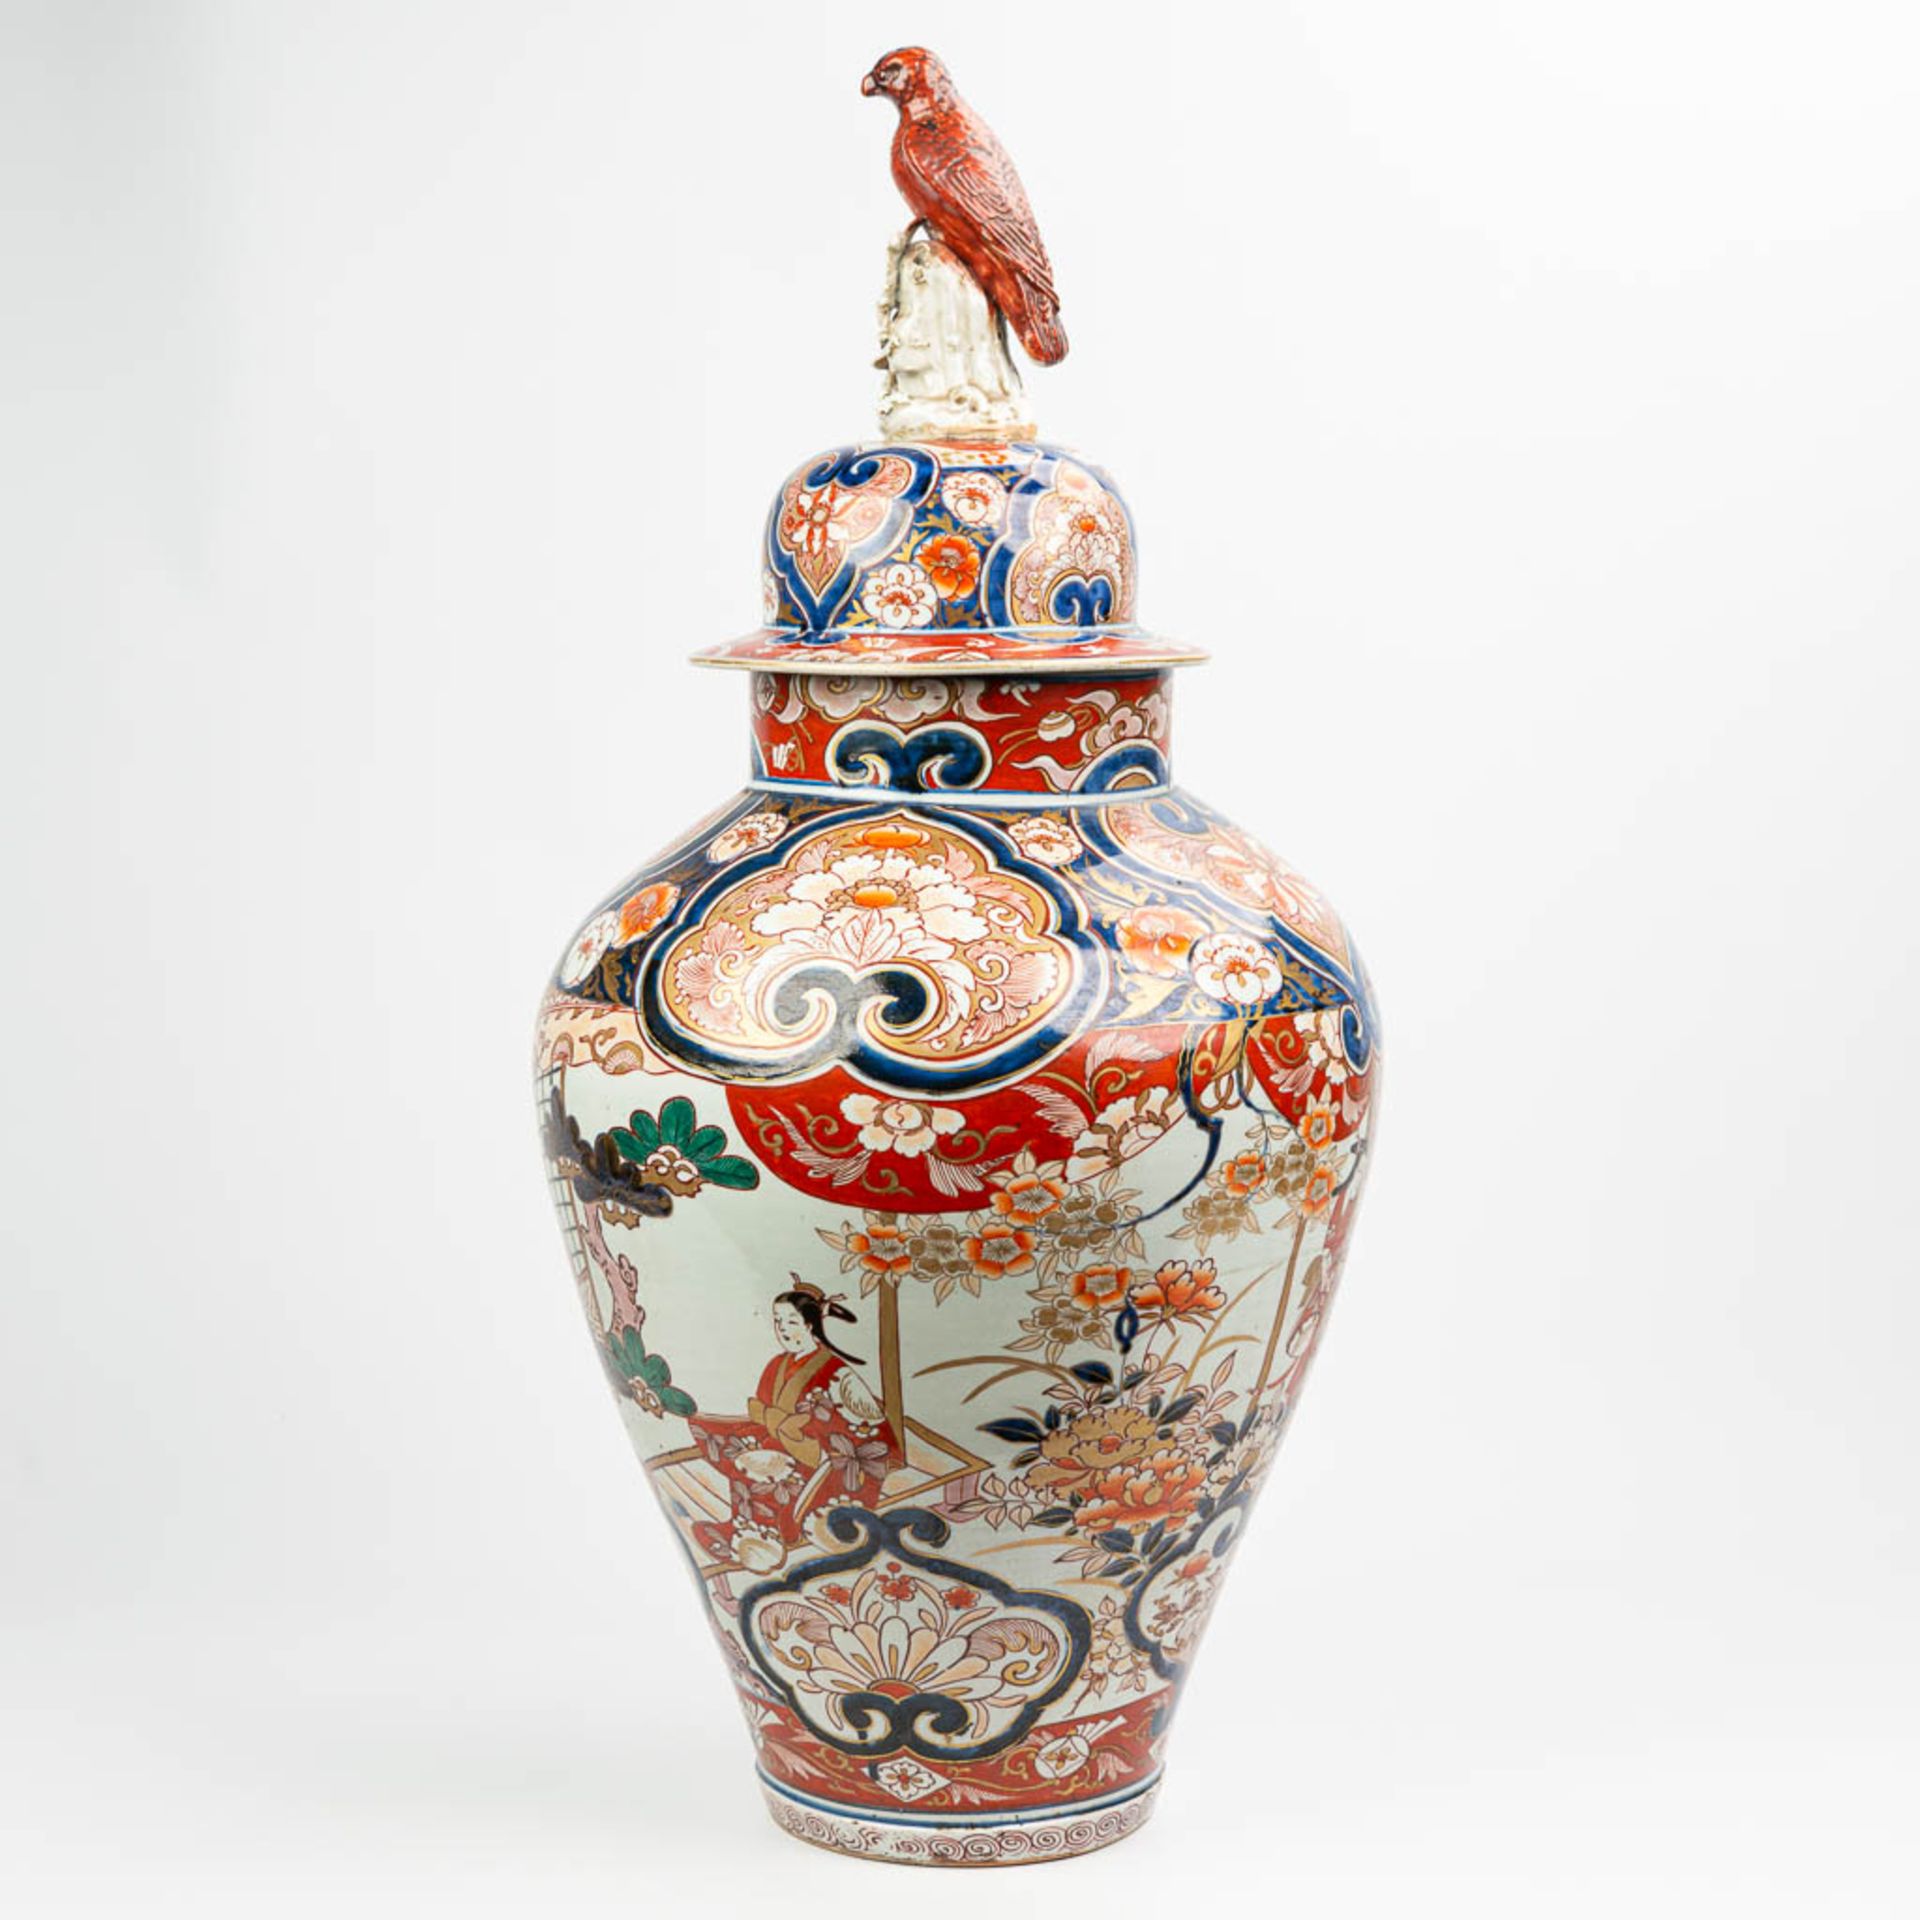 A large vase with lid made of Japanese porcelain in Imari - Image 3 of 16